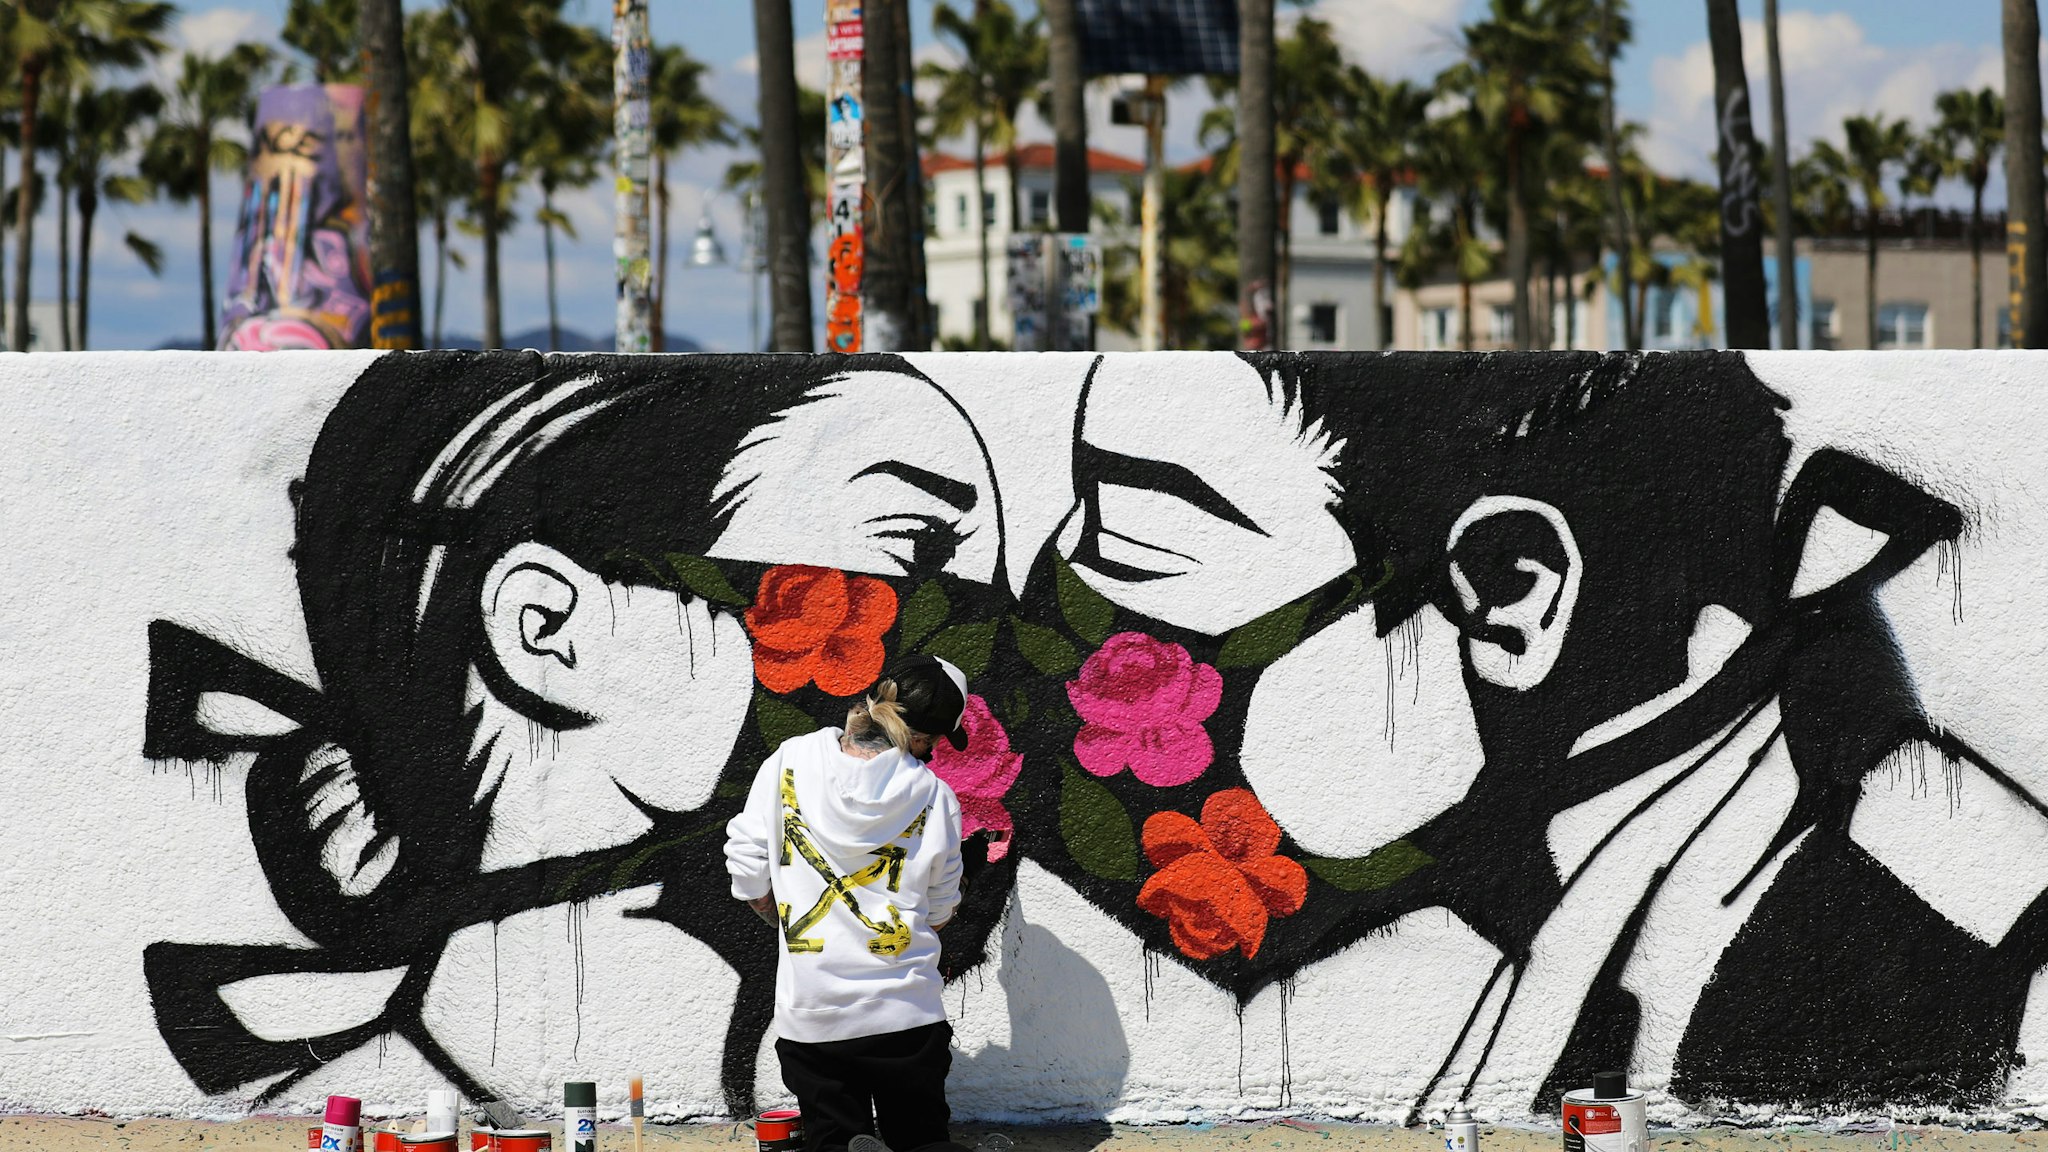 VENICE, CALIFORNIA - MARCH 21: Artist Pony Wave paints a scene depicting two people kissing while wearing face masks on Venice Beach on March 21, 2020 in Venice, California. California Governor Gavin Newsom issued a ‘stay at home’ order for California’s 40 million residents in order to slow the spread of coronavirus (COVID-19). Californians may still go to the beach without violating Newsom’s order as long as they maintain social distancing and adhere to other public health measures related to the coronavirus. (Photo by Mario Tama/Getty Images)